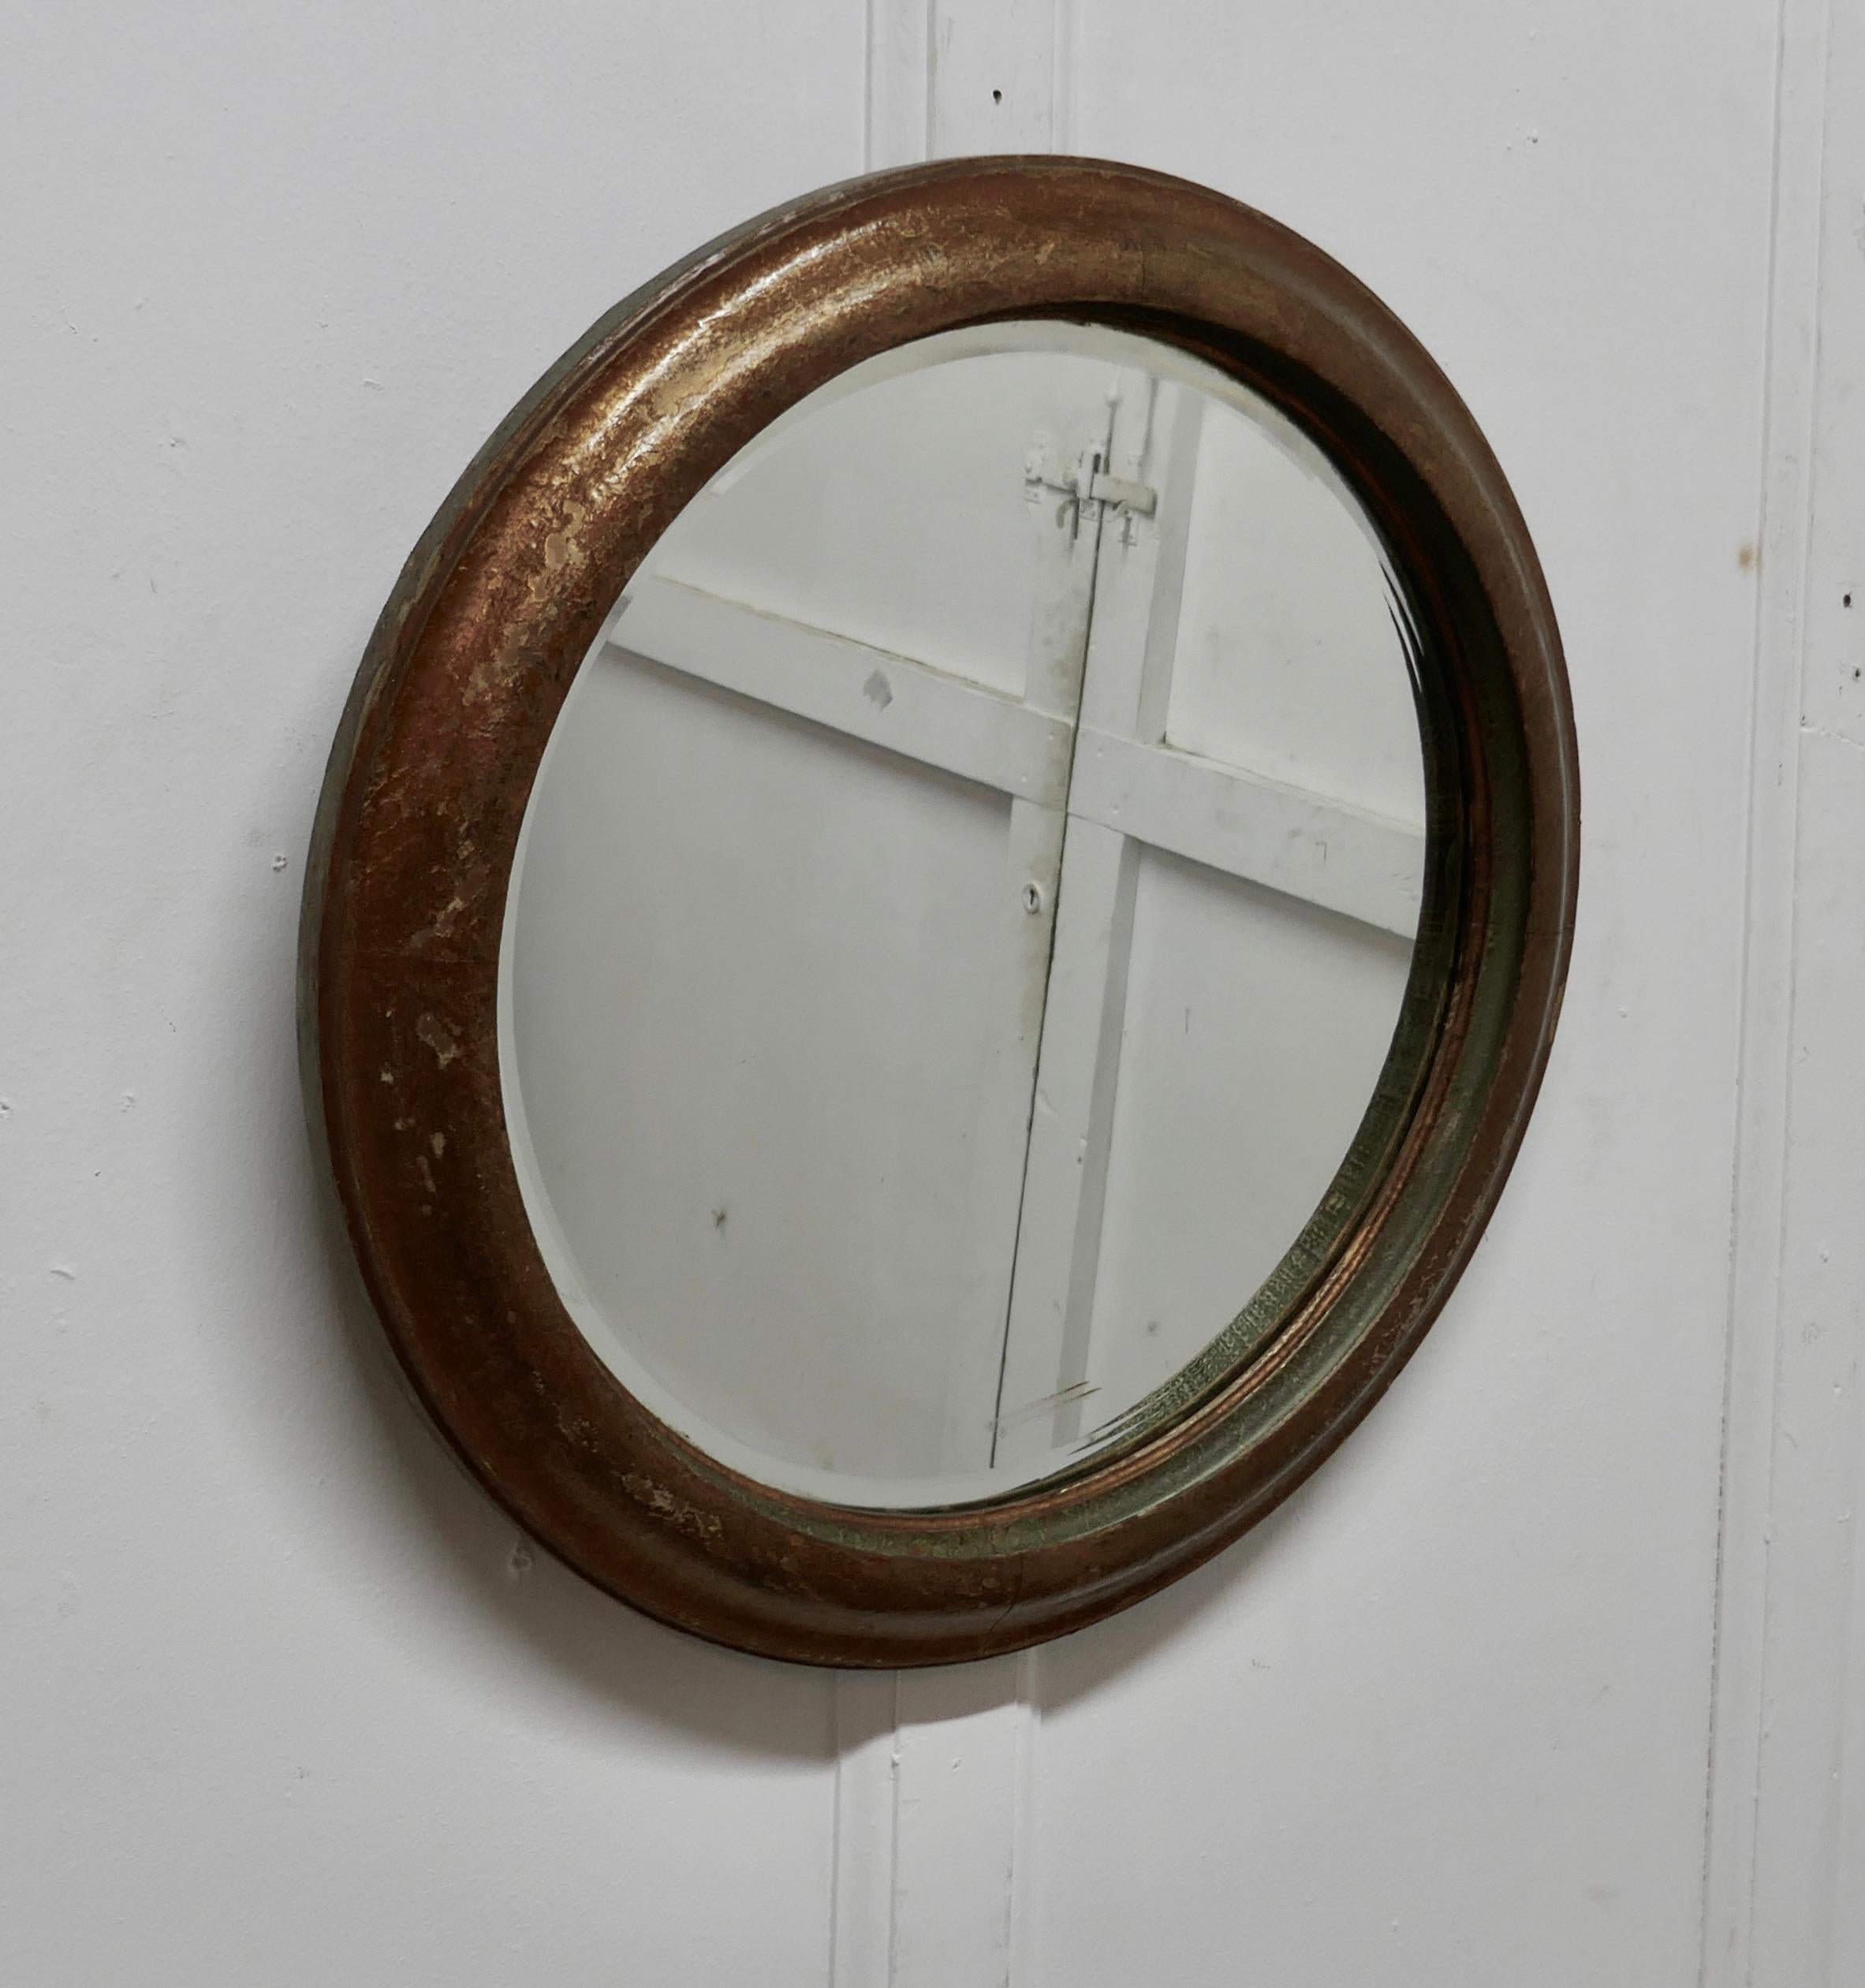 19th century round French wall mirror
 
This is a lovely 19th century French mirror, the 2” moulded frame has a charming crackled gold finish which shows the red and green oxide undercoat showing through, it is sound and has the original bevelled